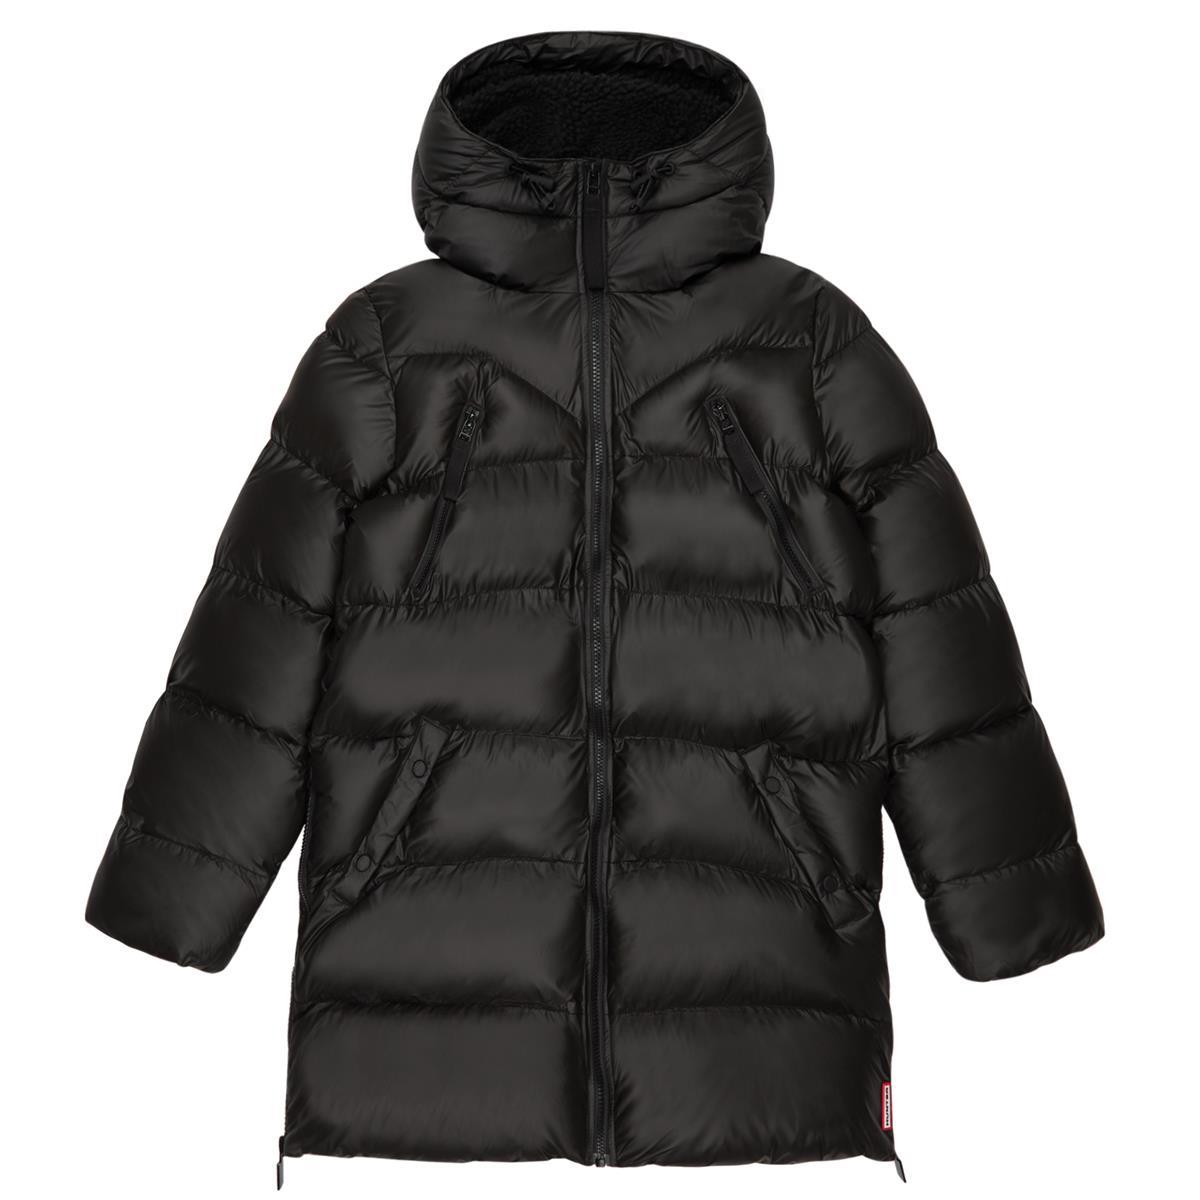 What purpose does the coating on the shell fabric of the Hunter Puffer Jacket serve?